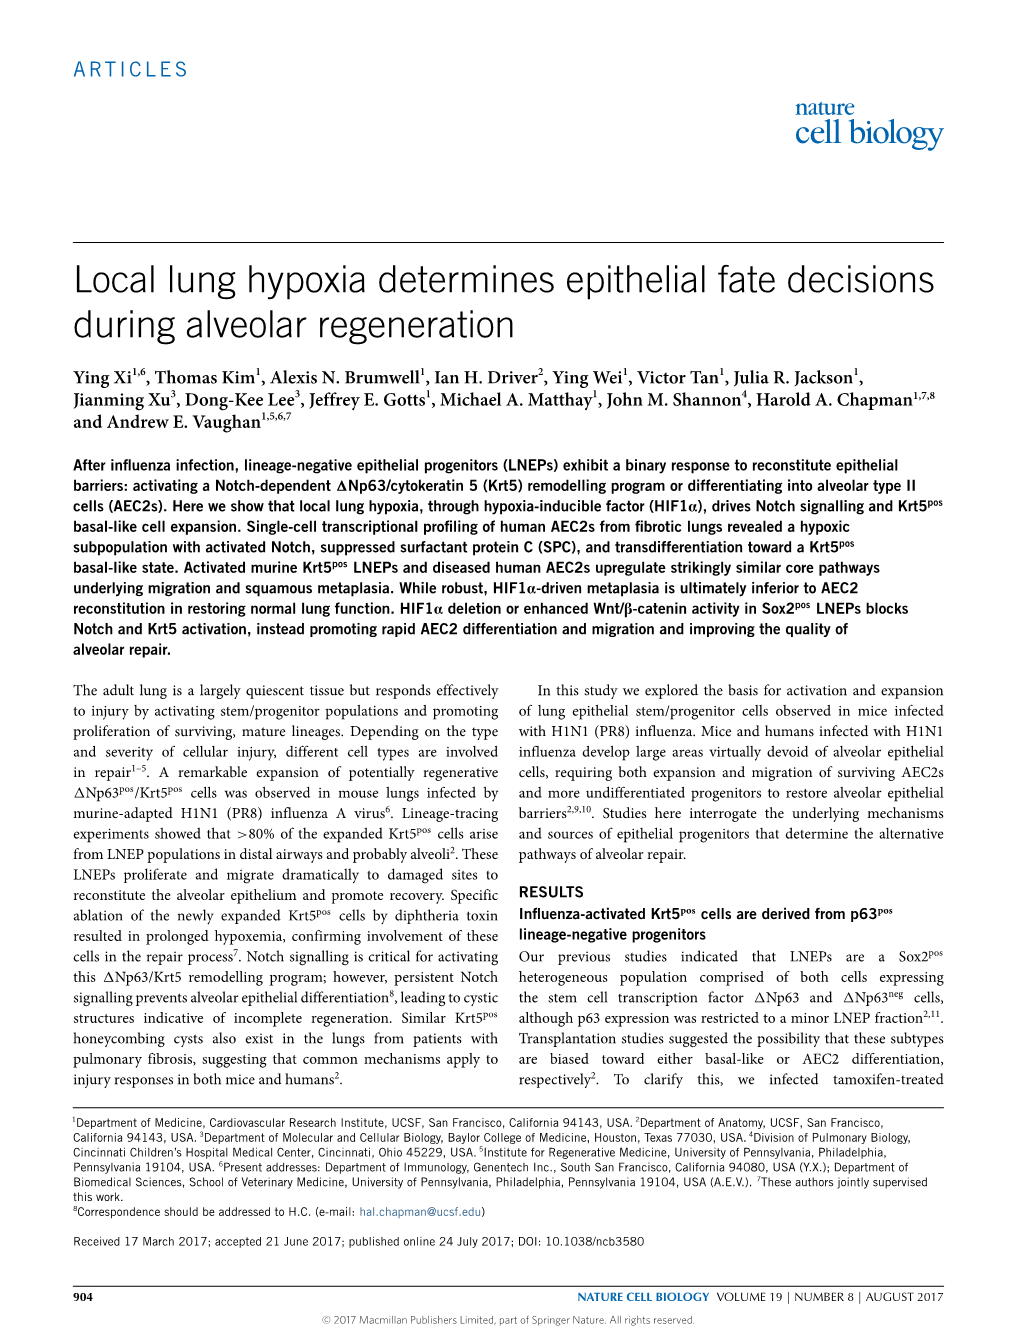 Local Lung Hypoxia Determines Epithelial Fate Decisions During Alveolar Regeneration